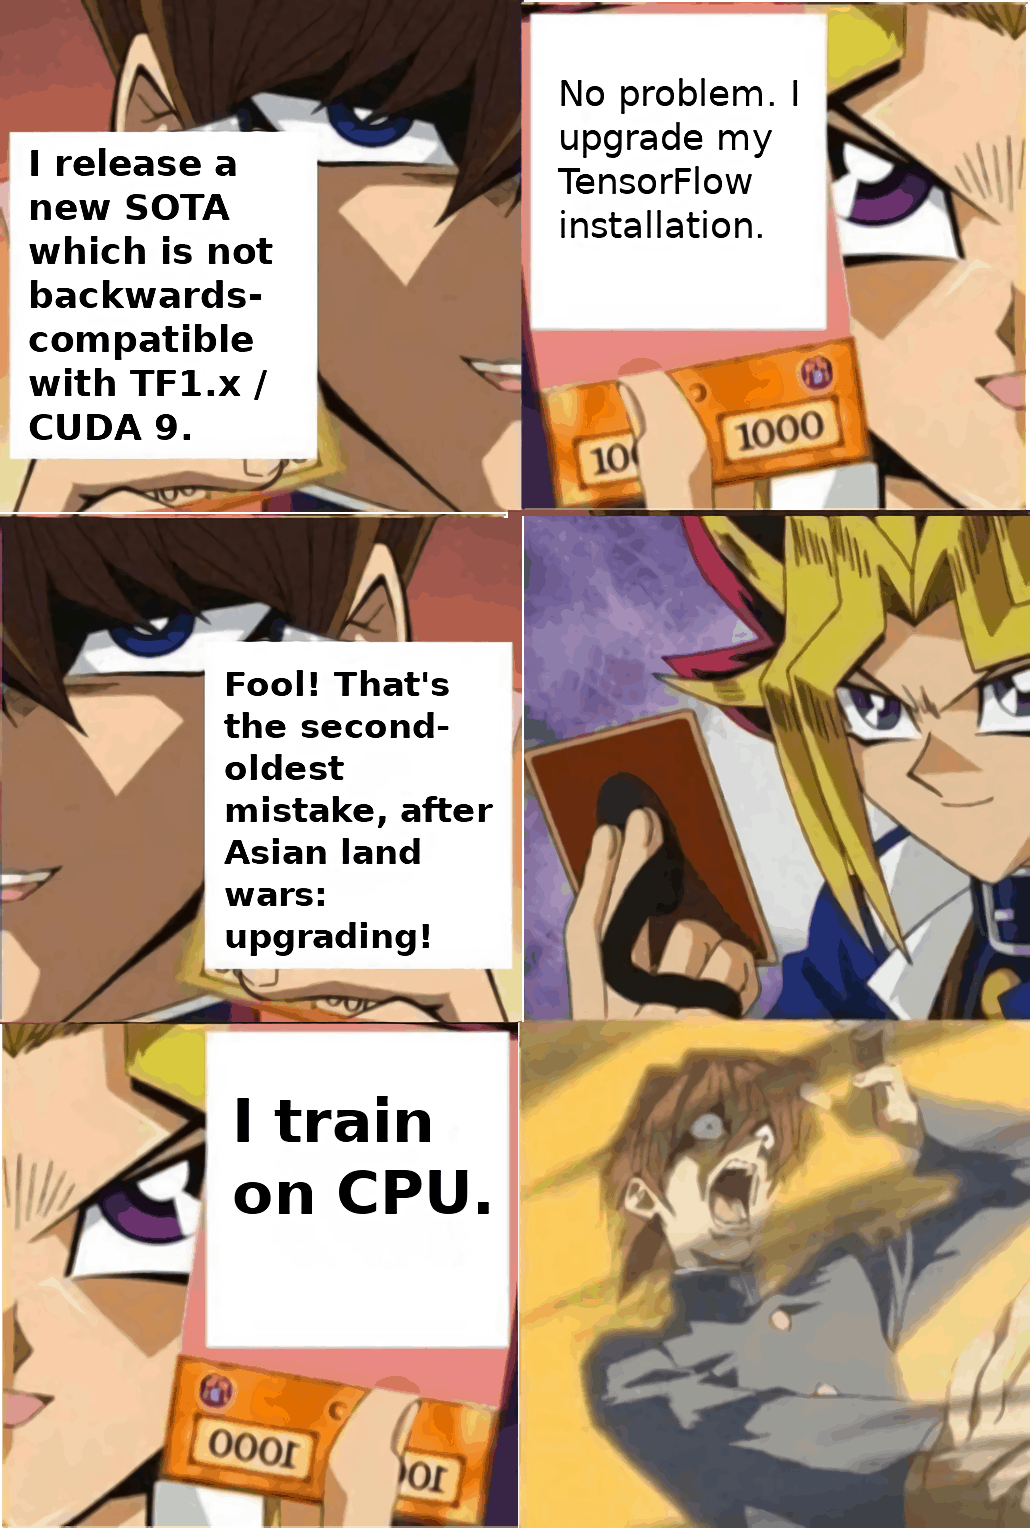 The temptation of CPU training after a bad Tensorflow upgrade.